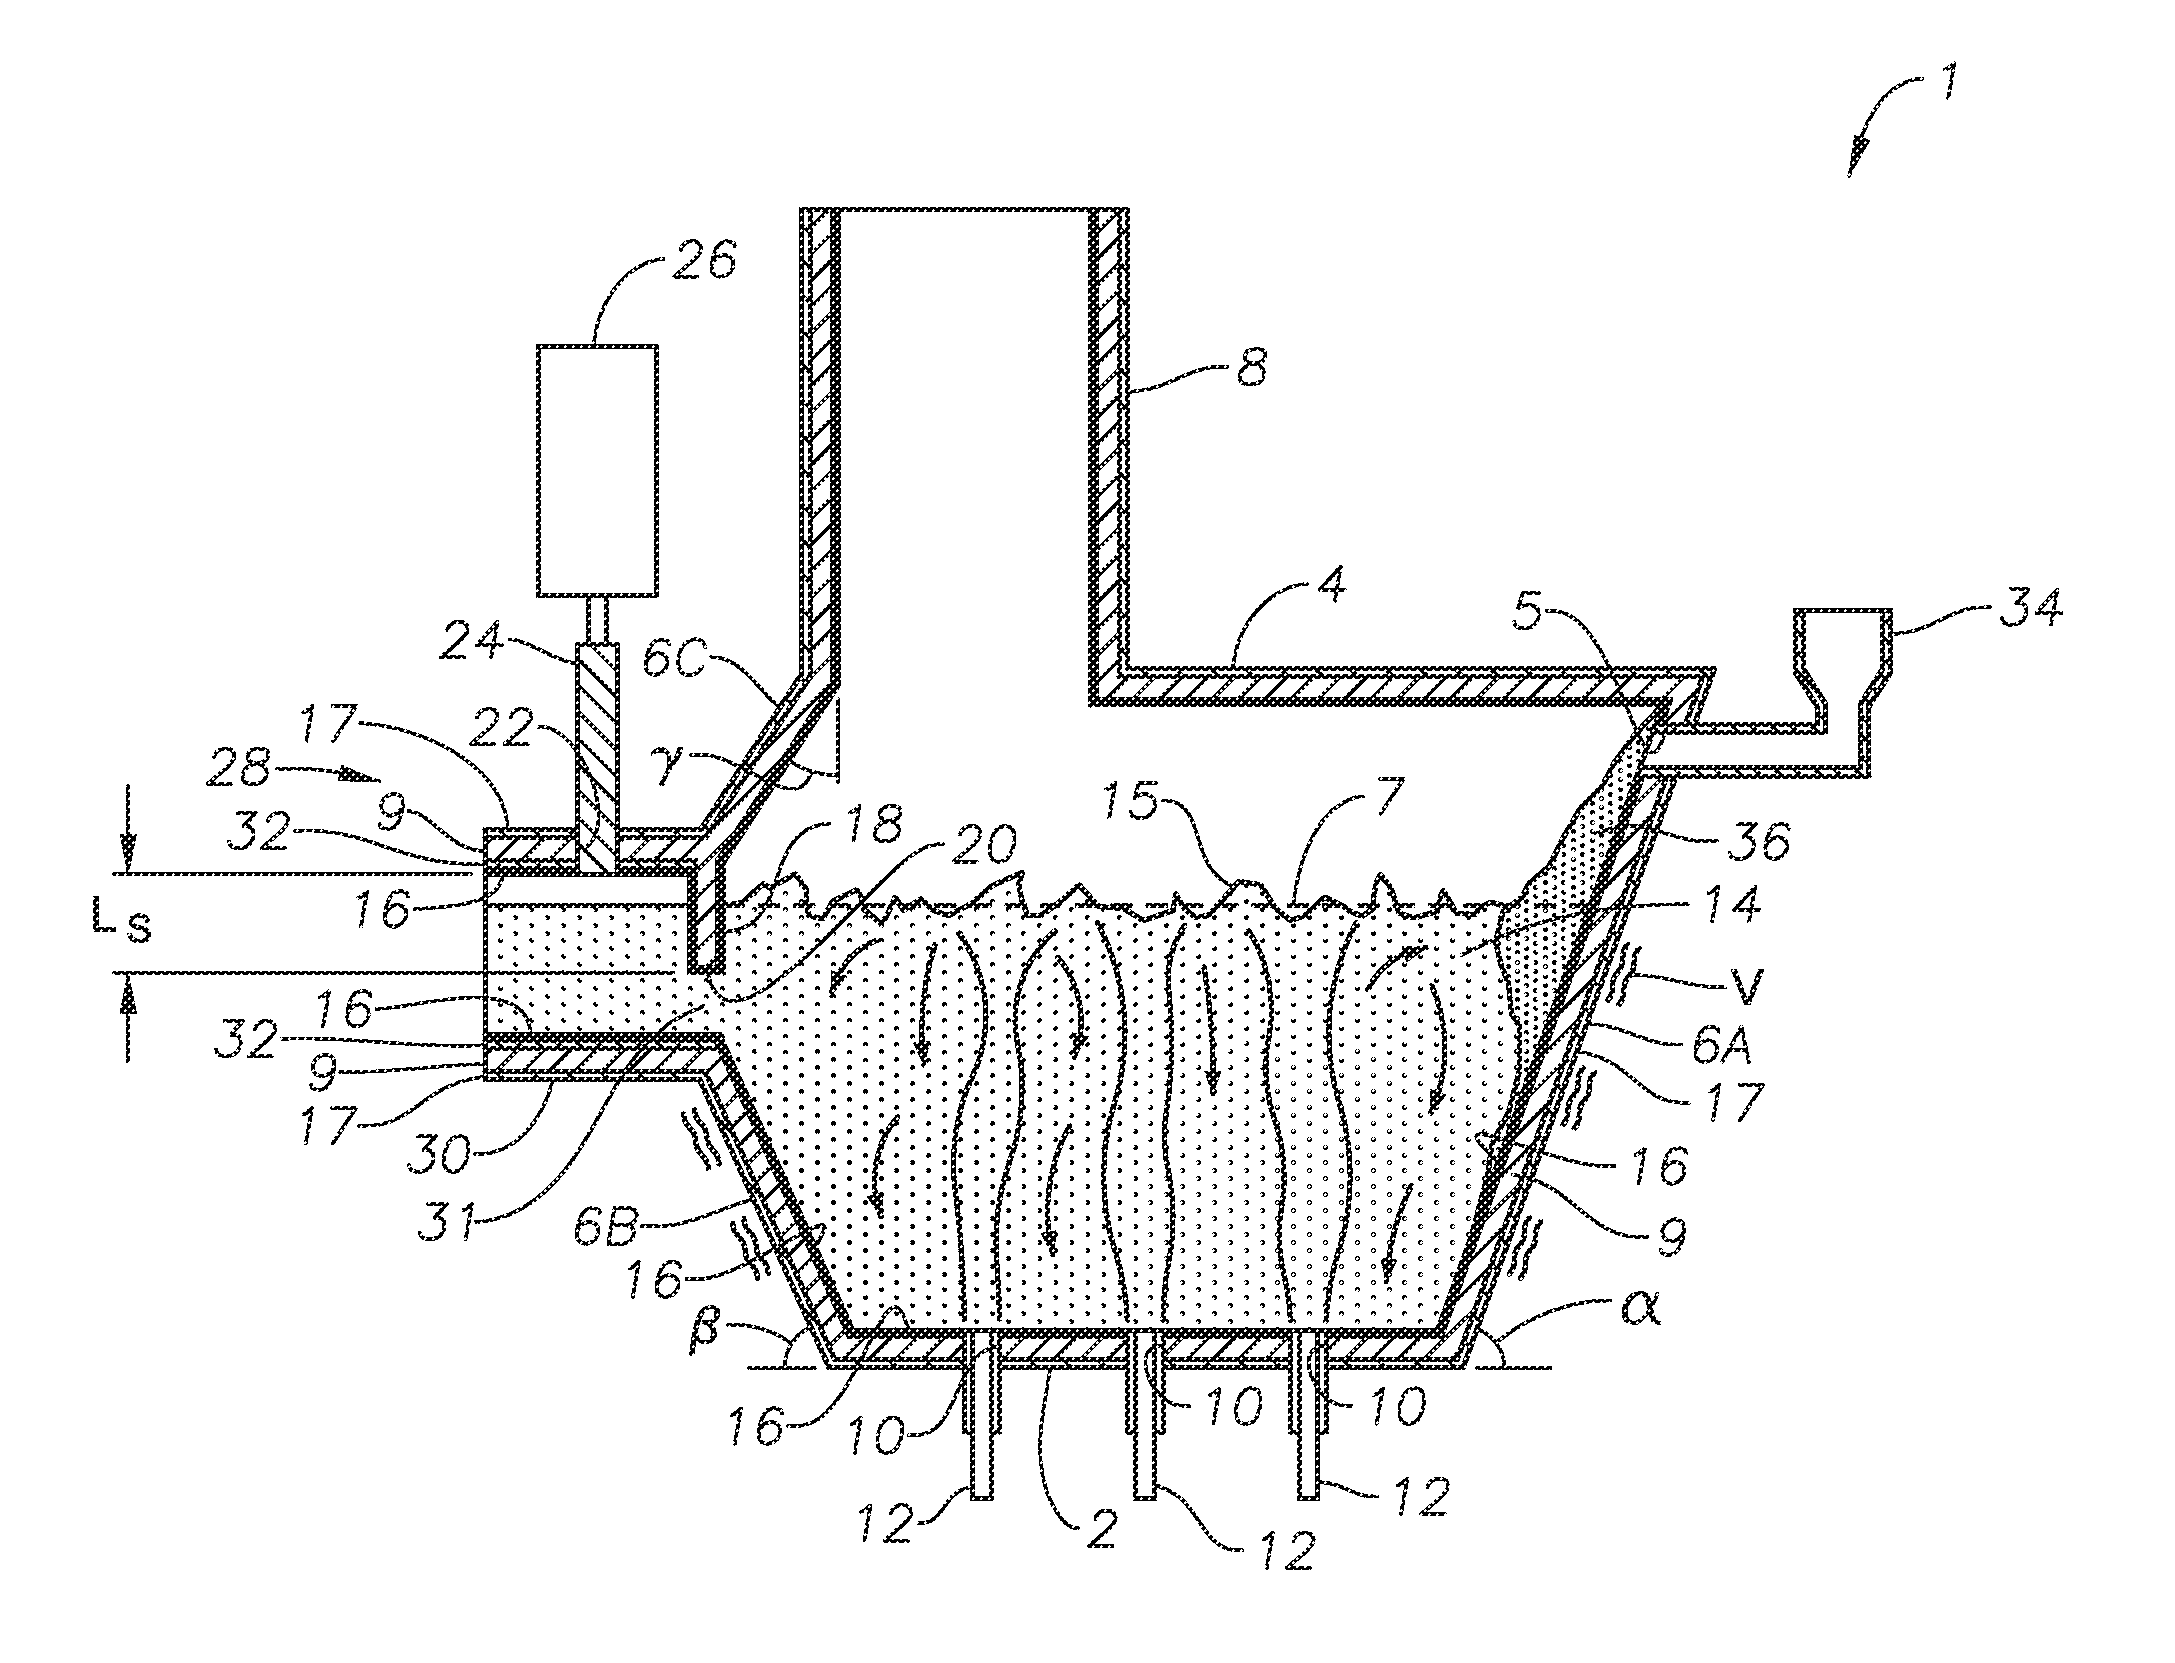 Submerged combustion melter comprising a melt exit structure designed to minimize impact of mechanical energy, and methods of making molten glass